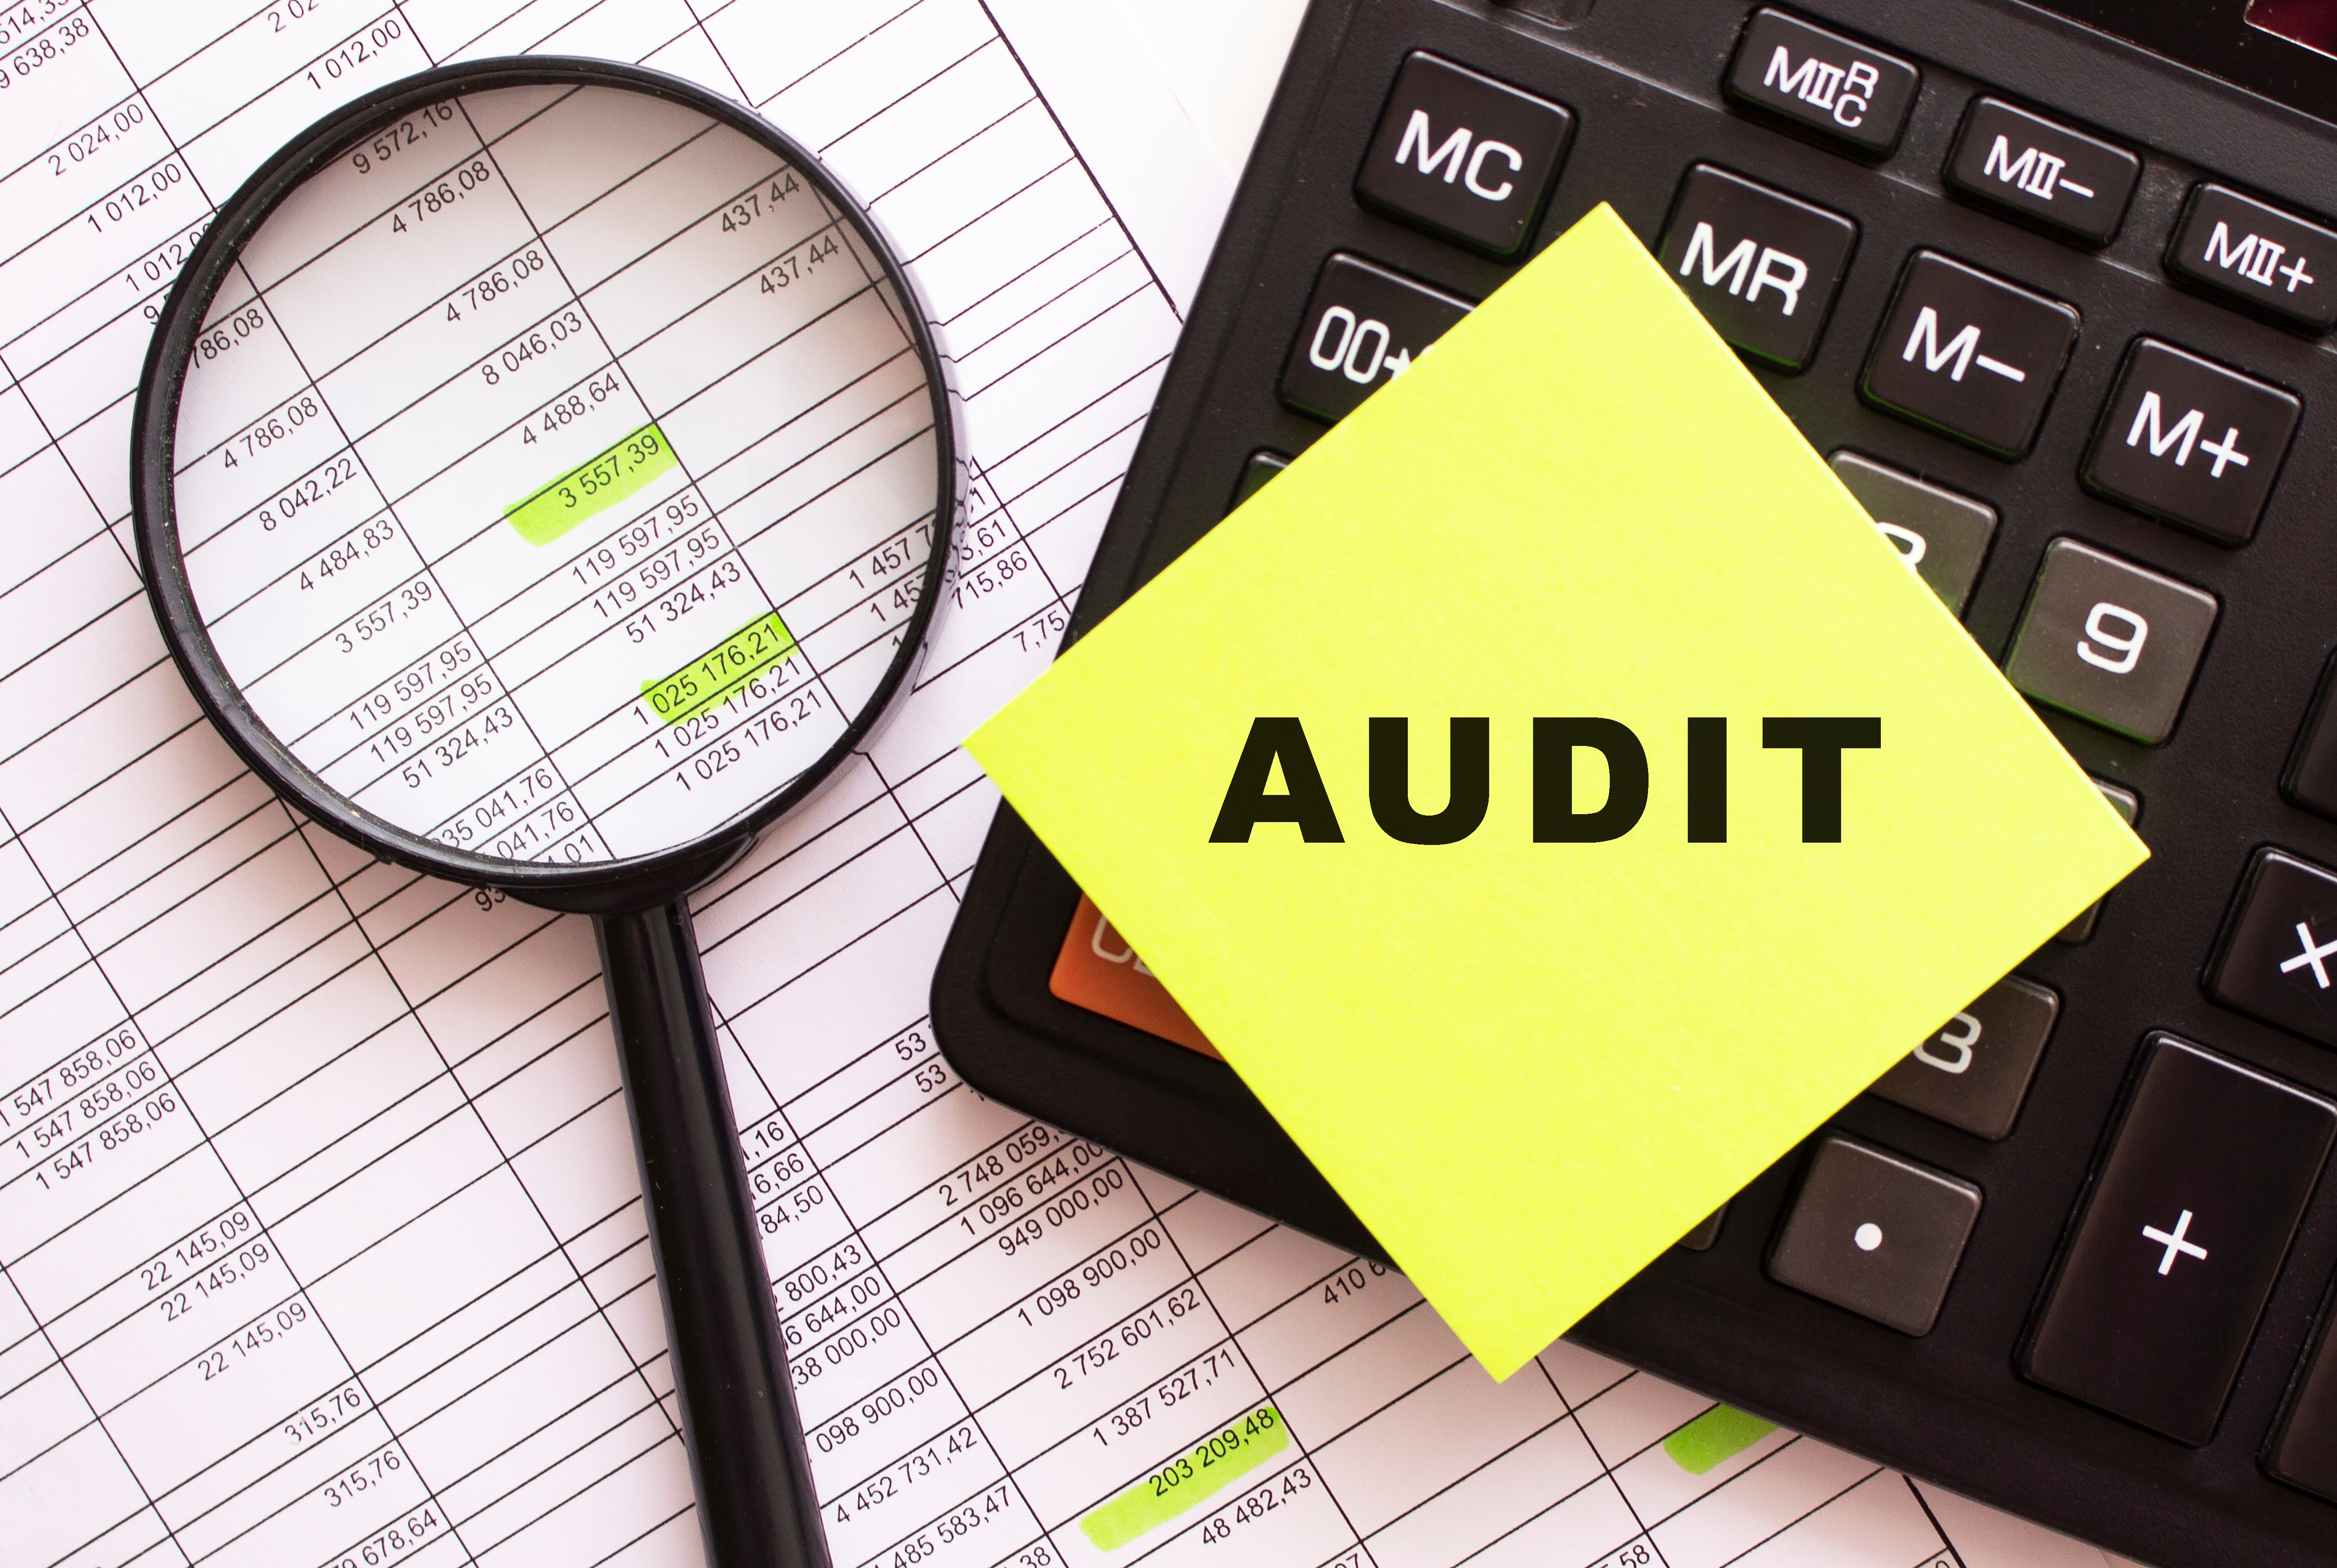 Body Corporate Audit Services with papers, calculator and magnifying glass